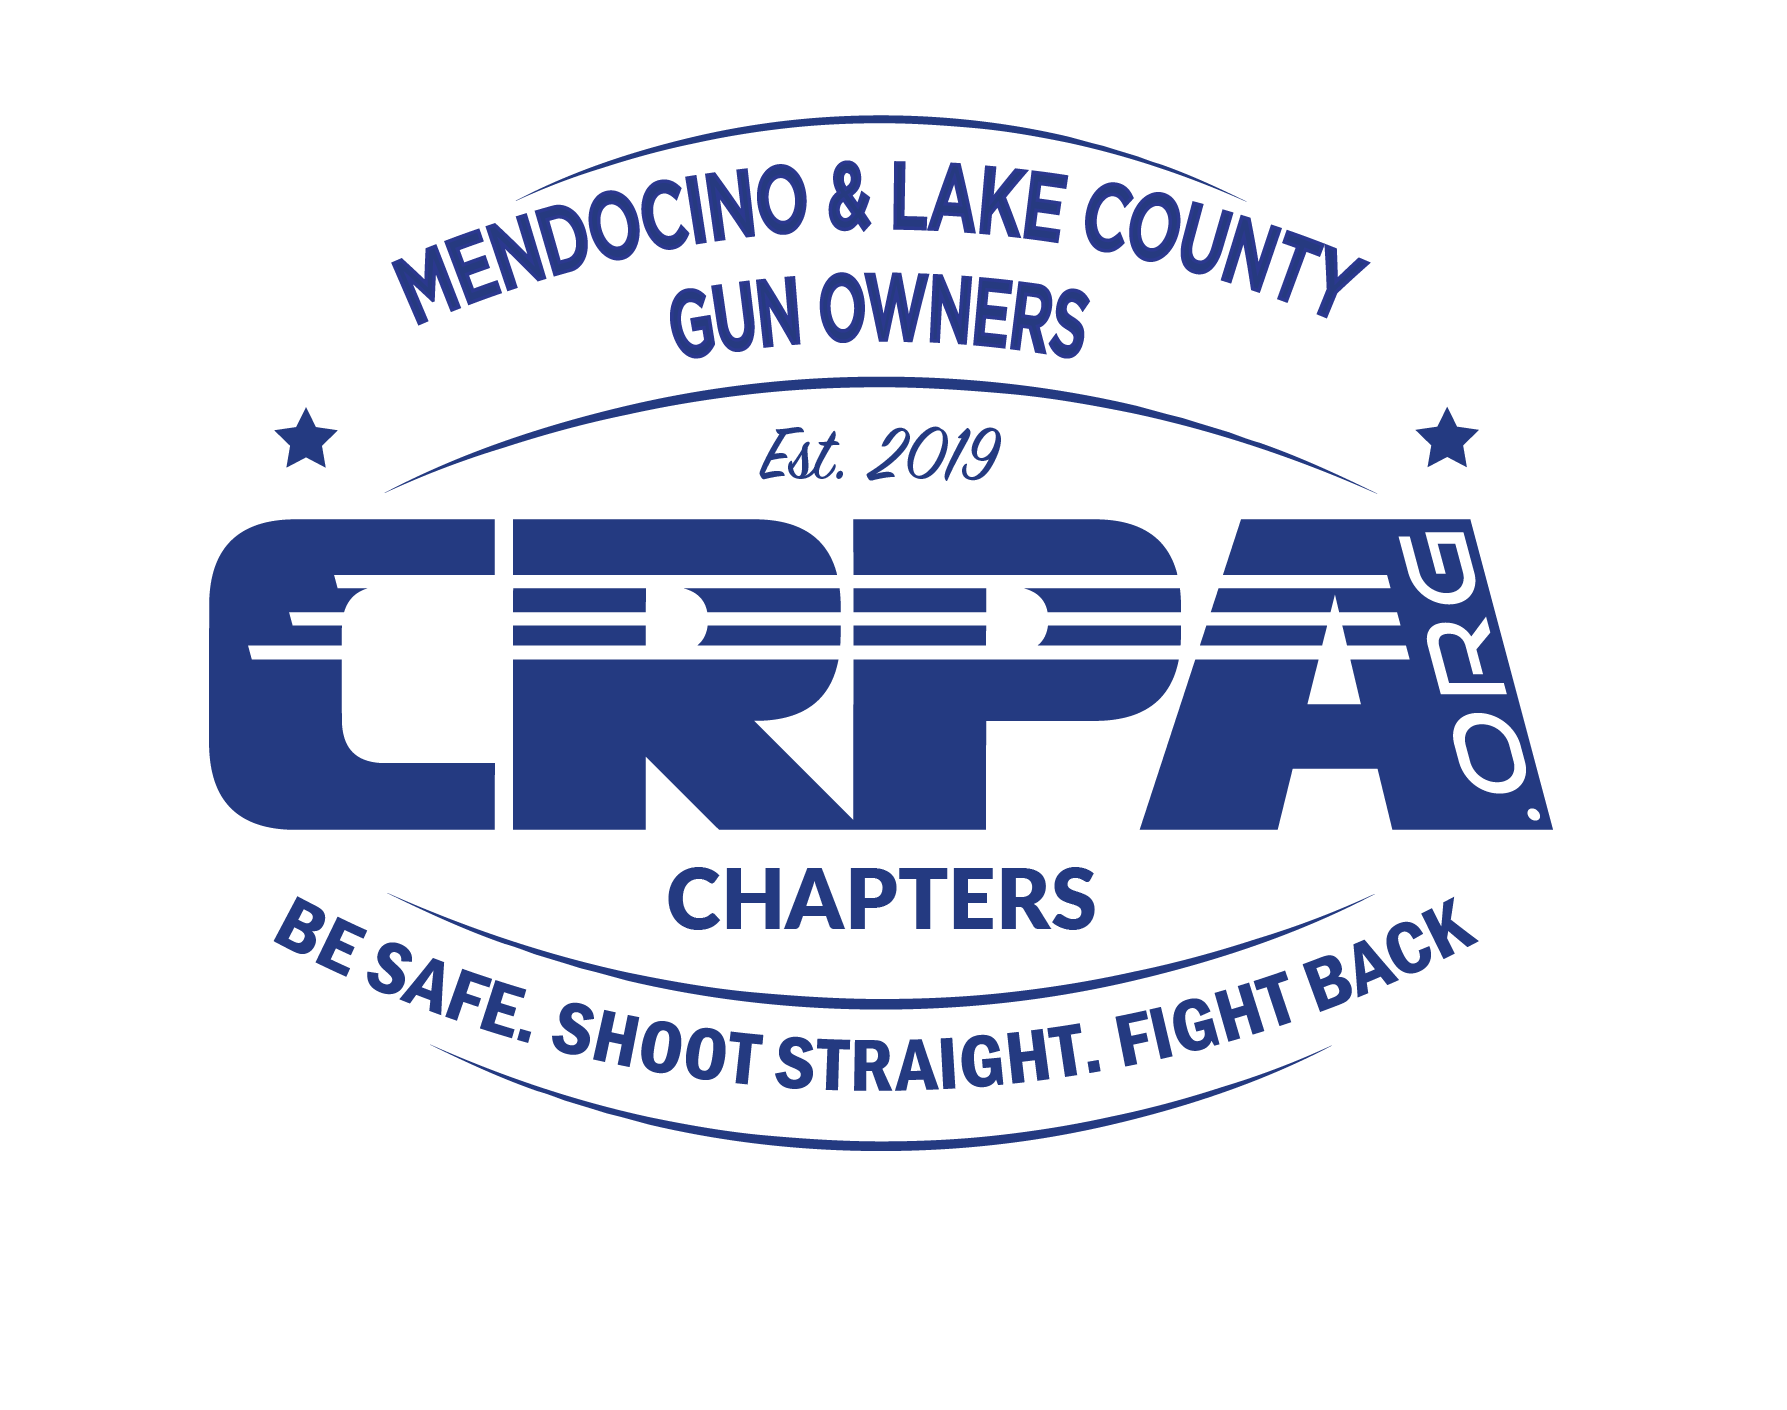 Mendocino & Lake County Gun Owners: A CRPA Chapter